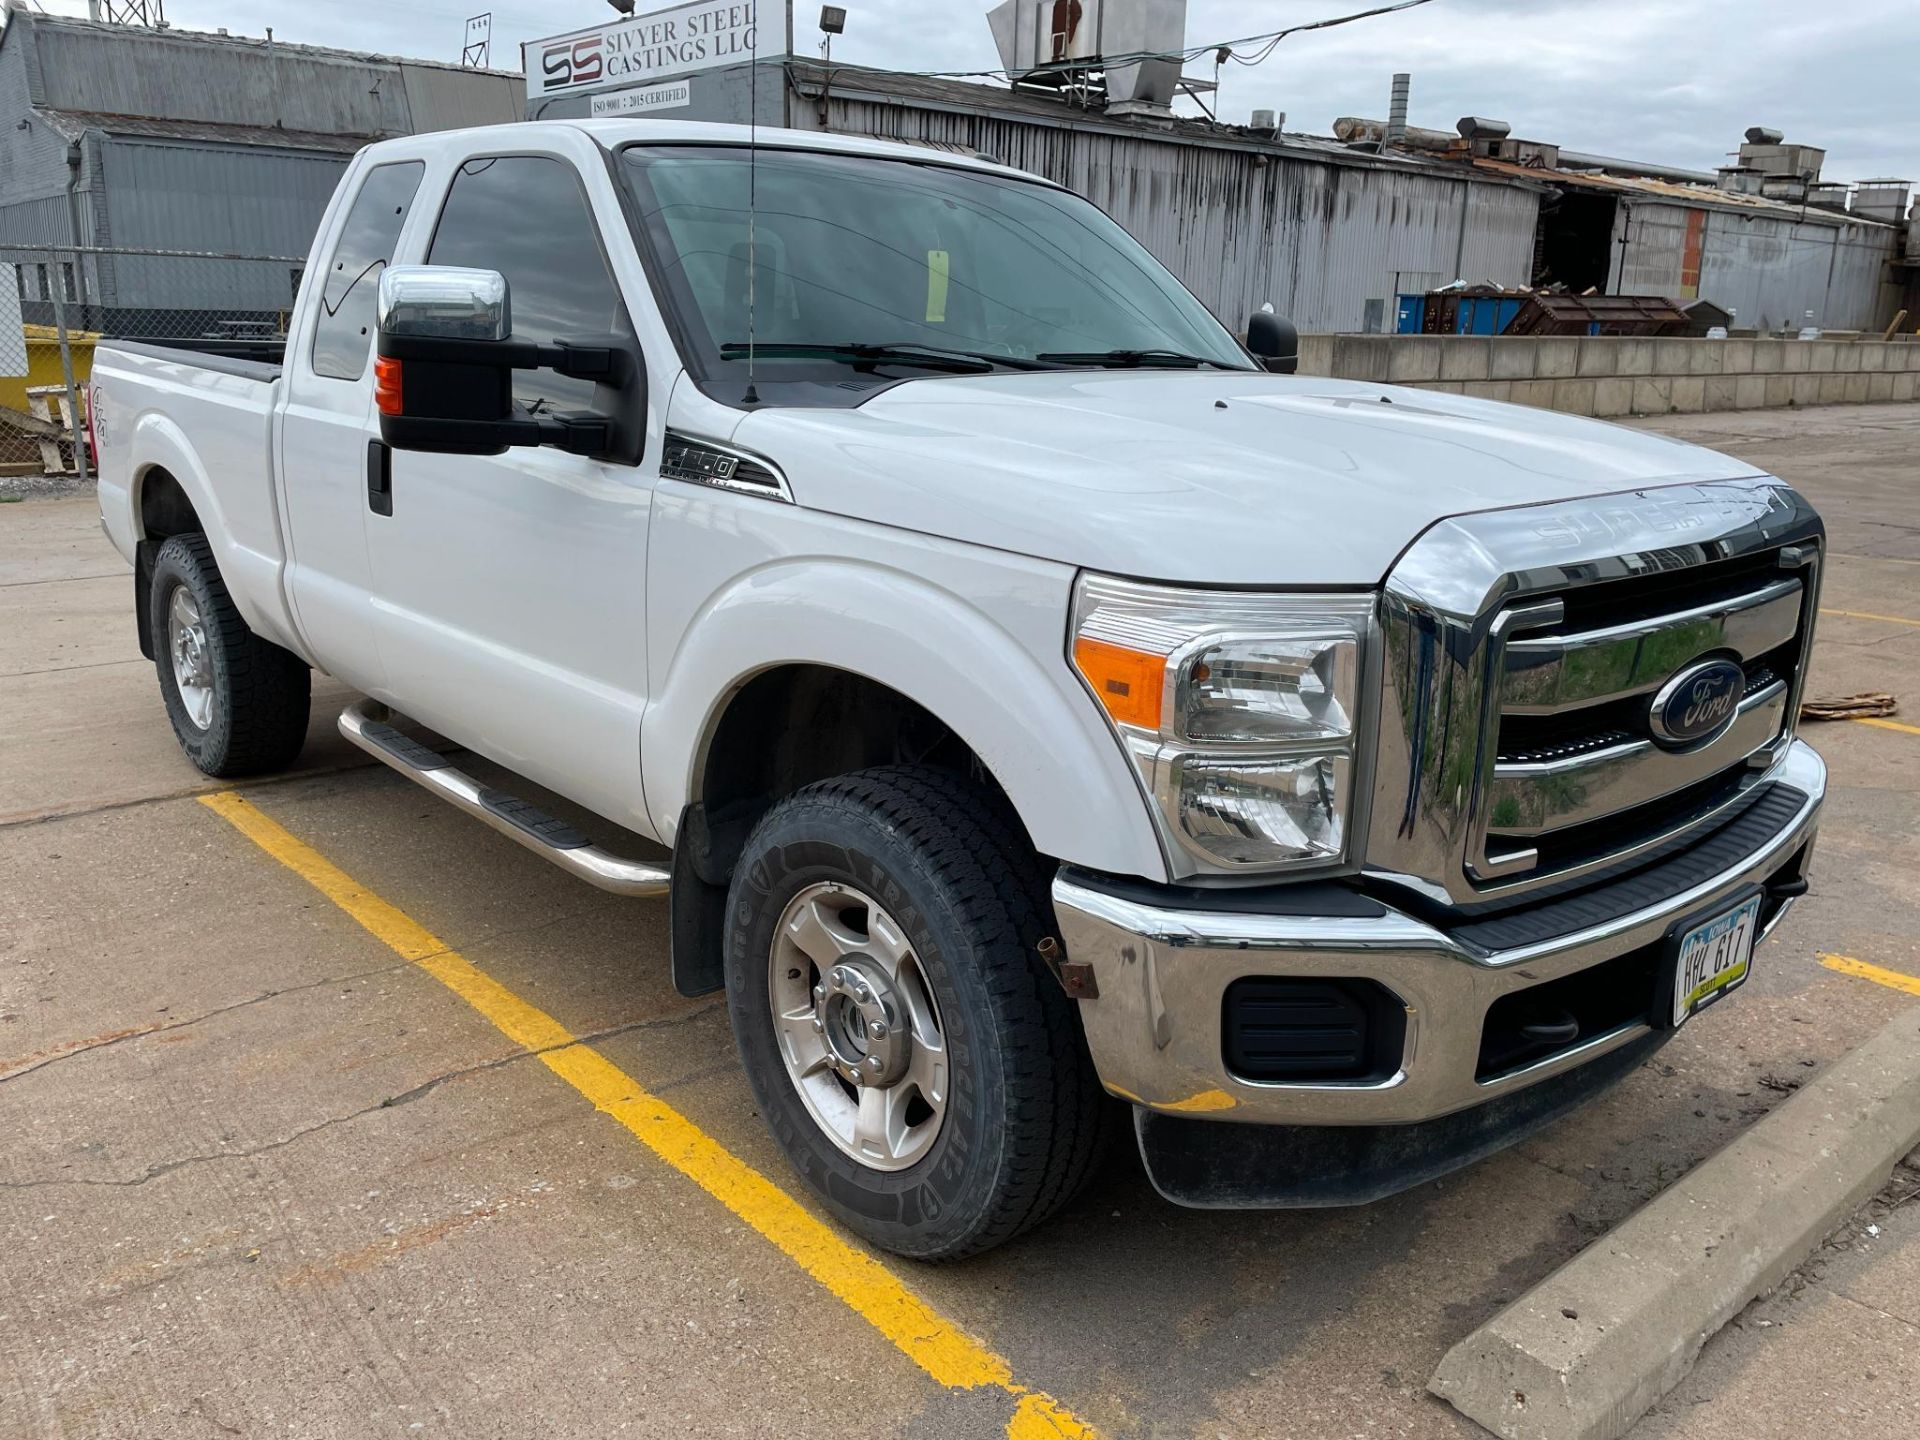 PICKUP TRUCK, 2013 FORD F-250 SUPER DUTY, 4X4, gasoline, extended cab, 123,494 miles, VIN - Image 4 of 15